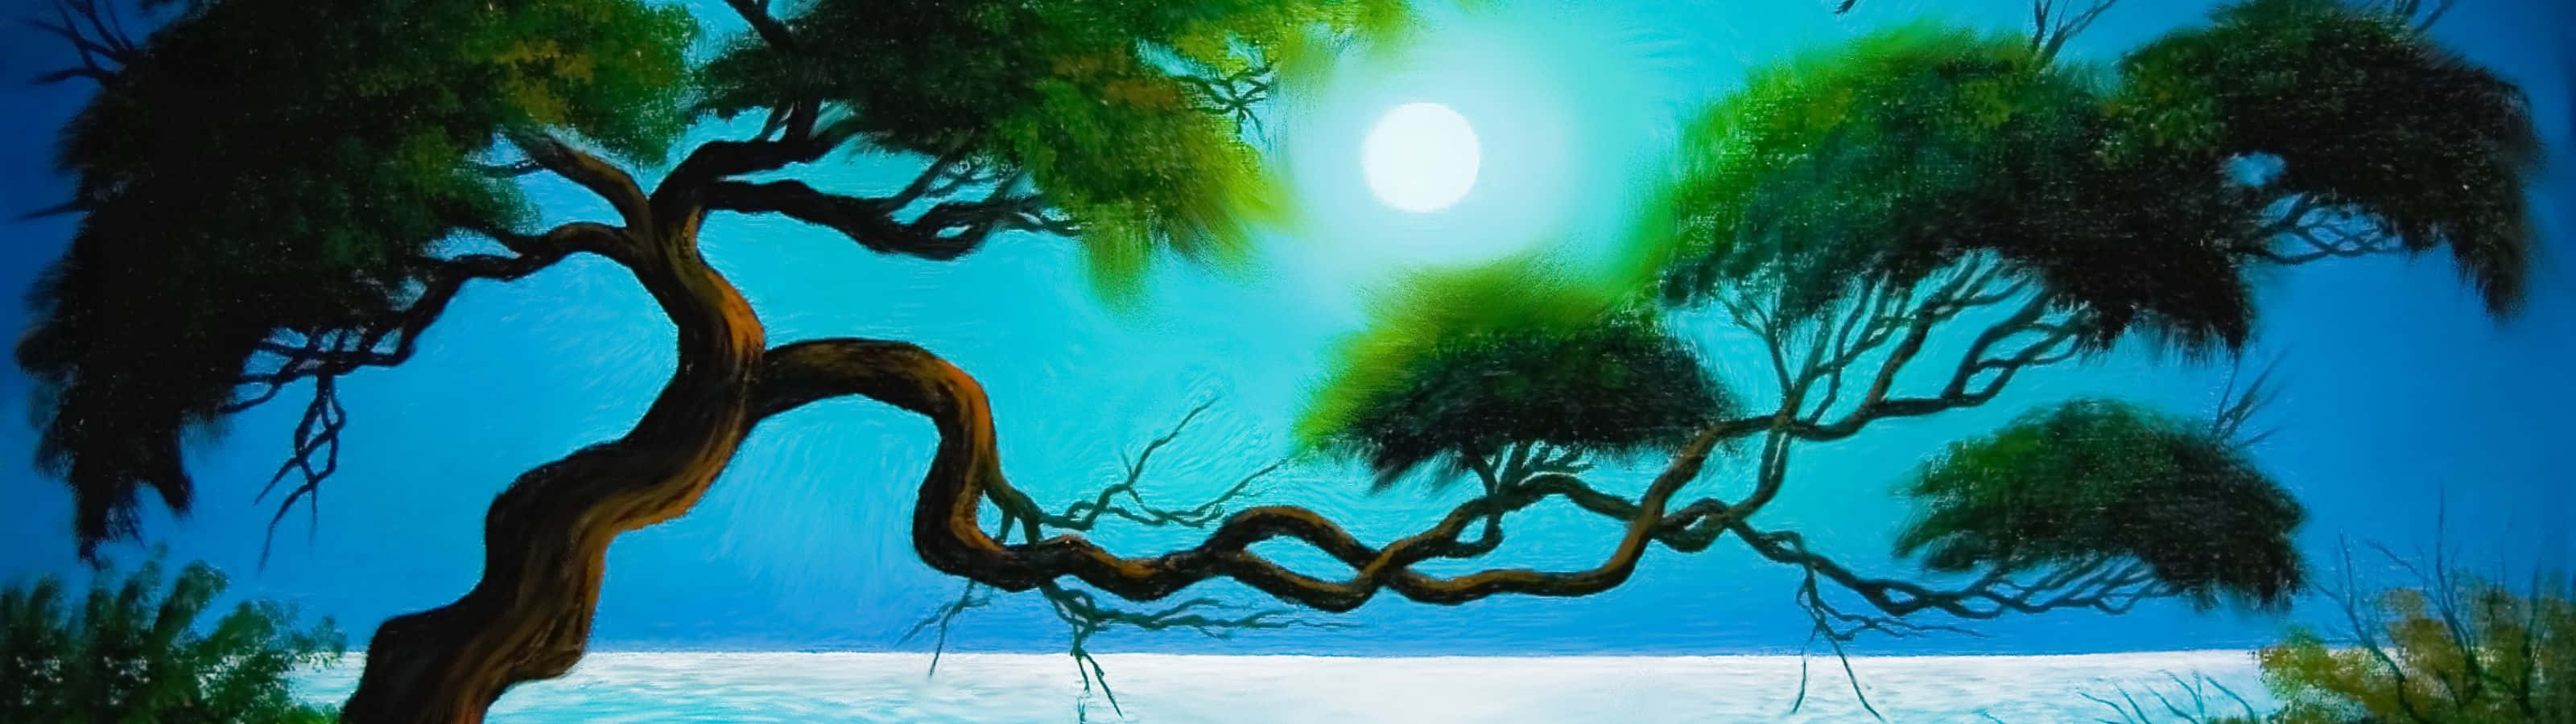 A Painting Of A Tree In The Water Background